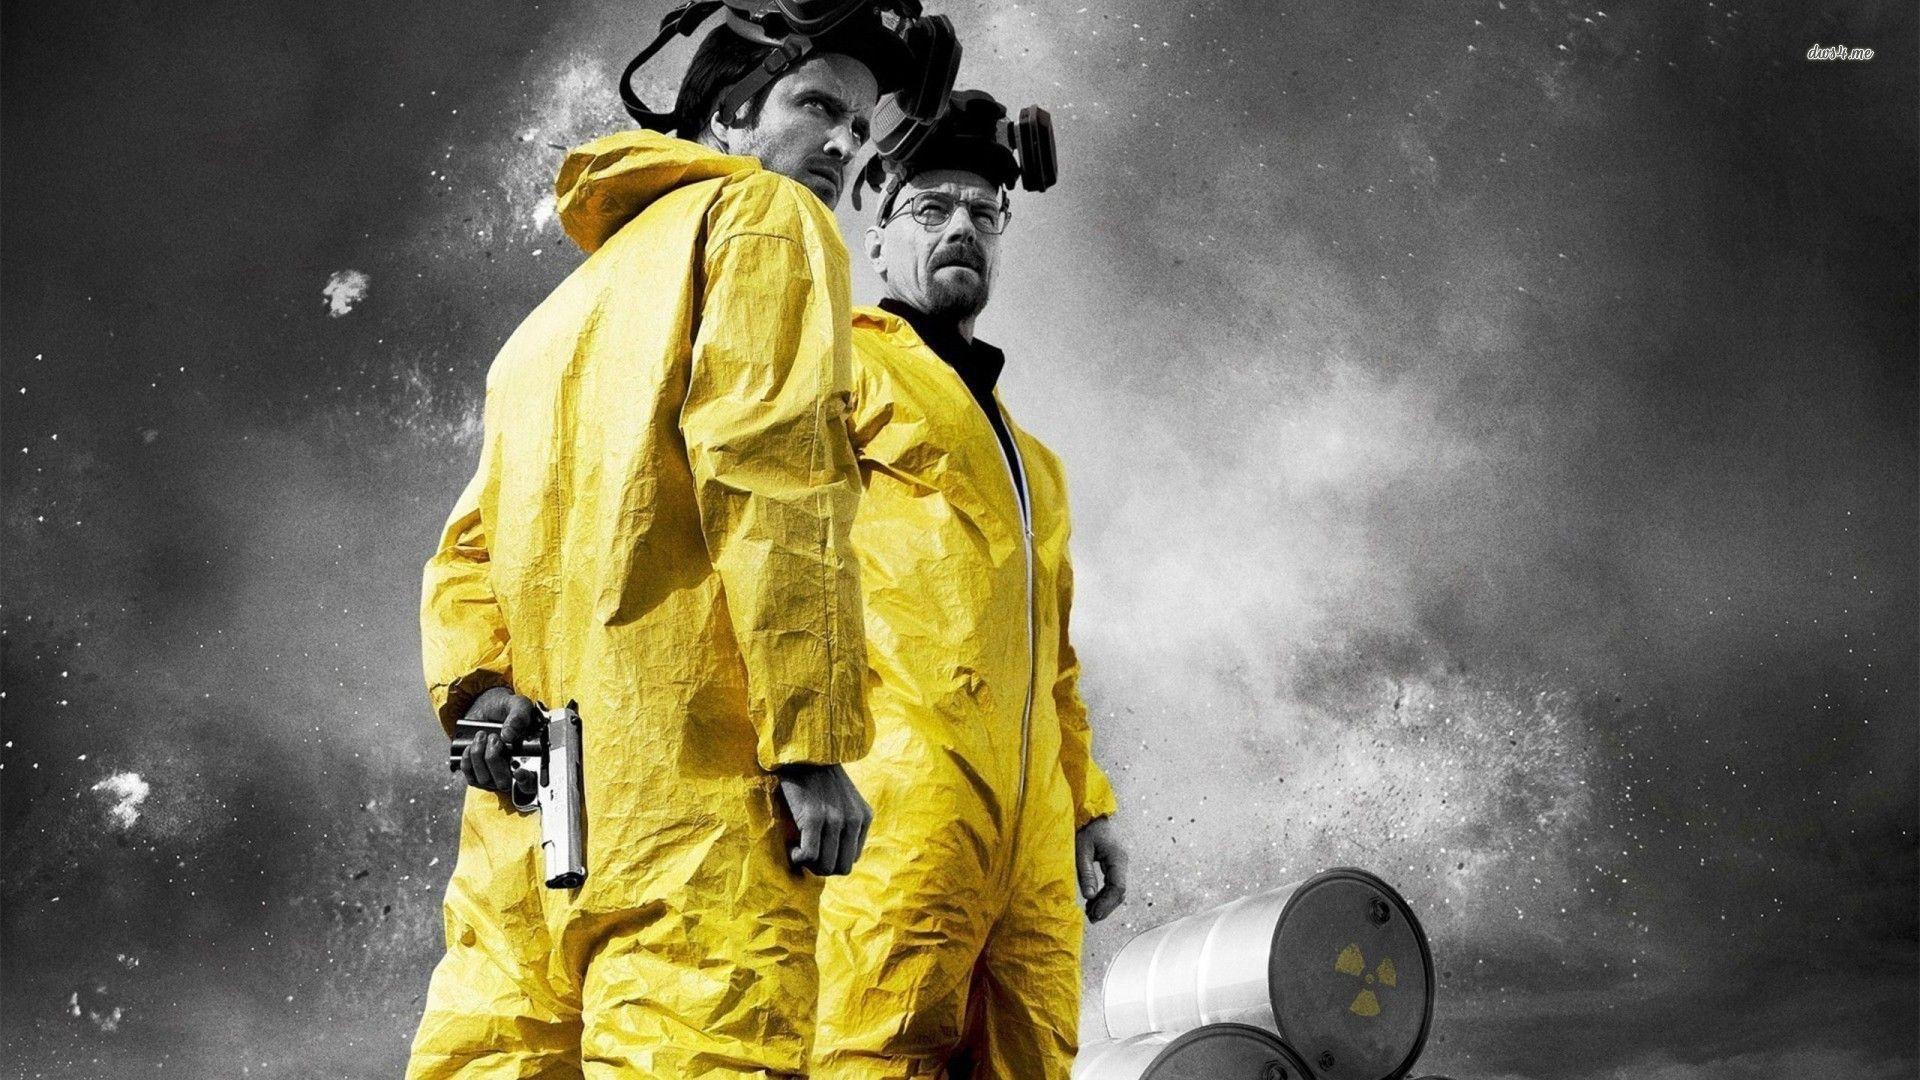 Walter White and Jesse Pinkman Bad wallpaper Show